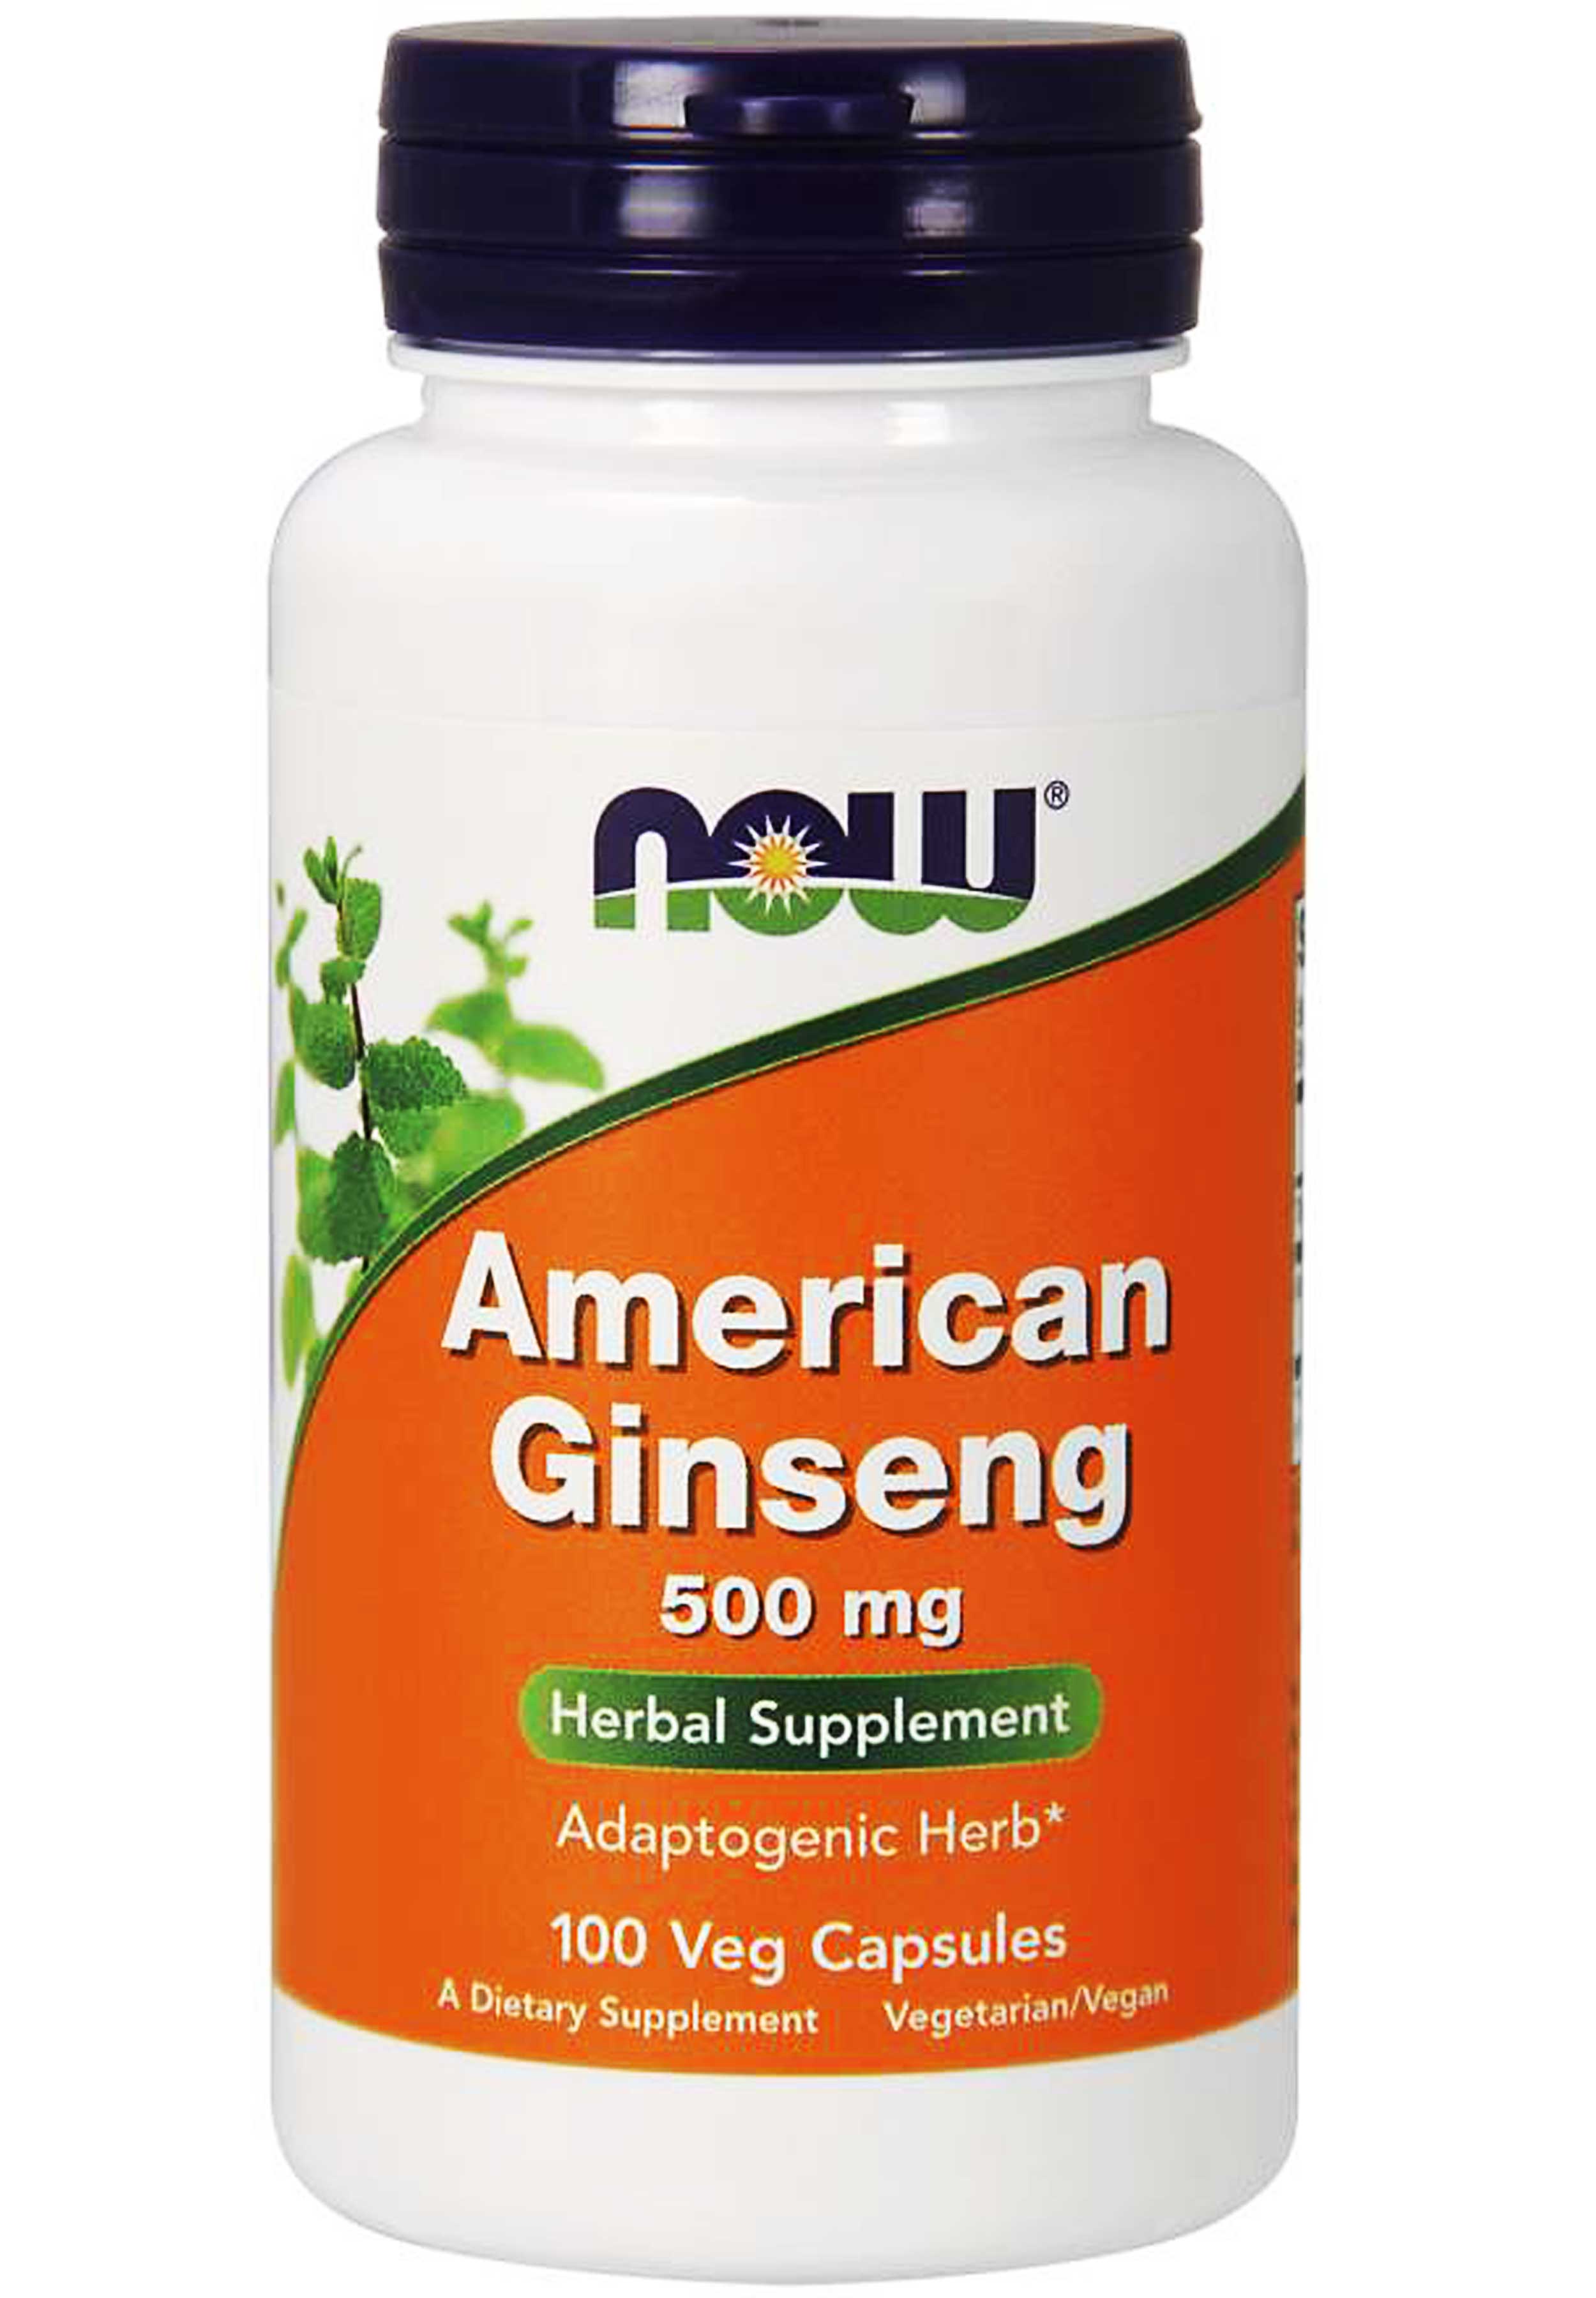 NOW American Ginseng 500 mg